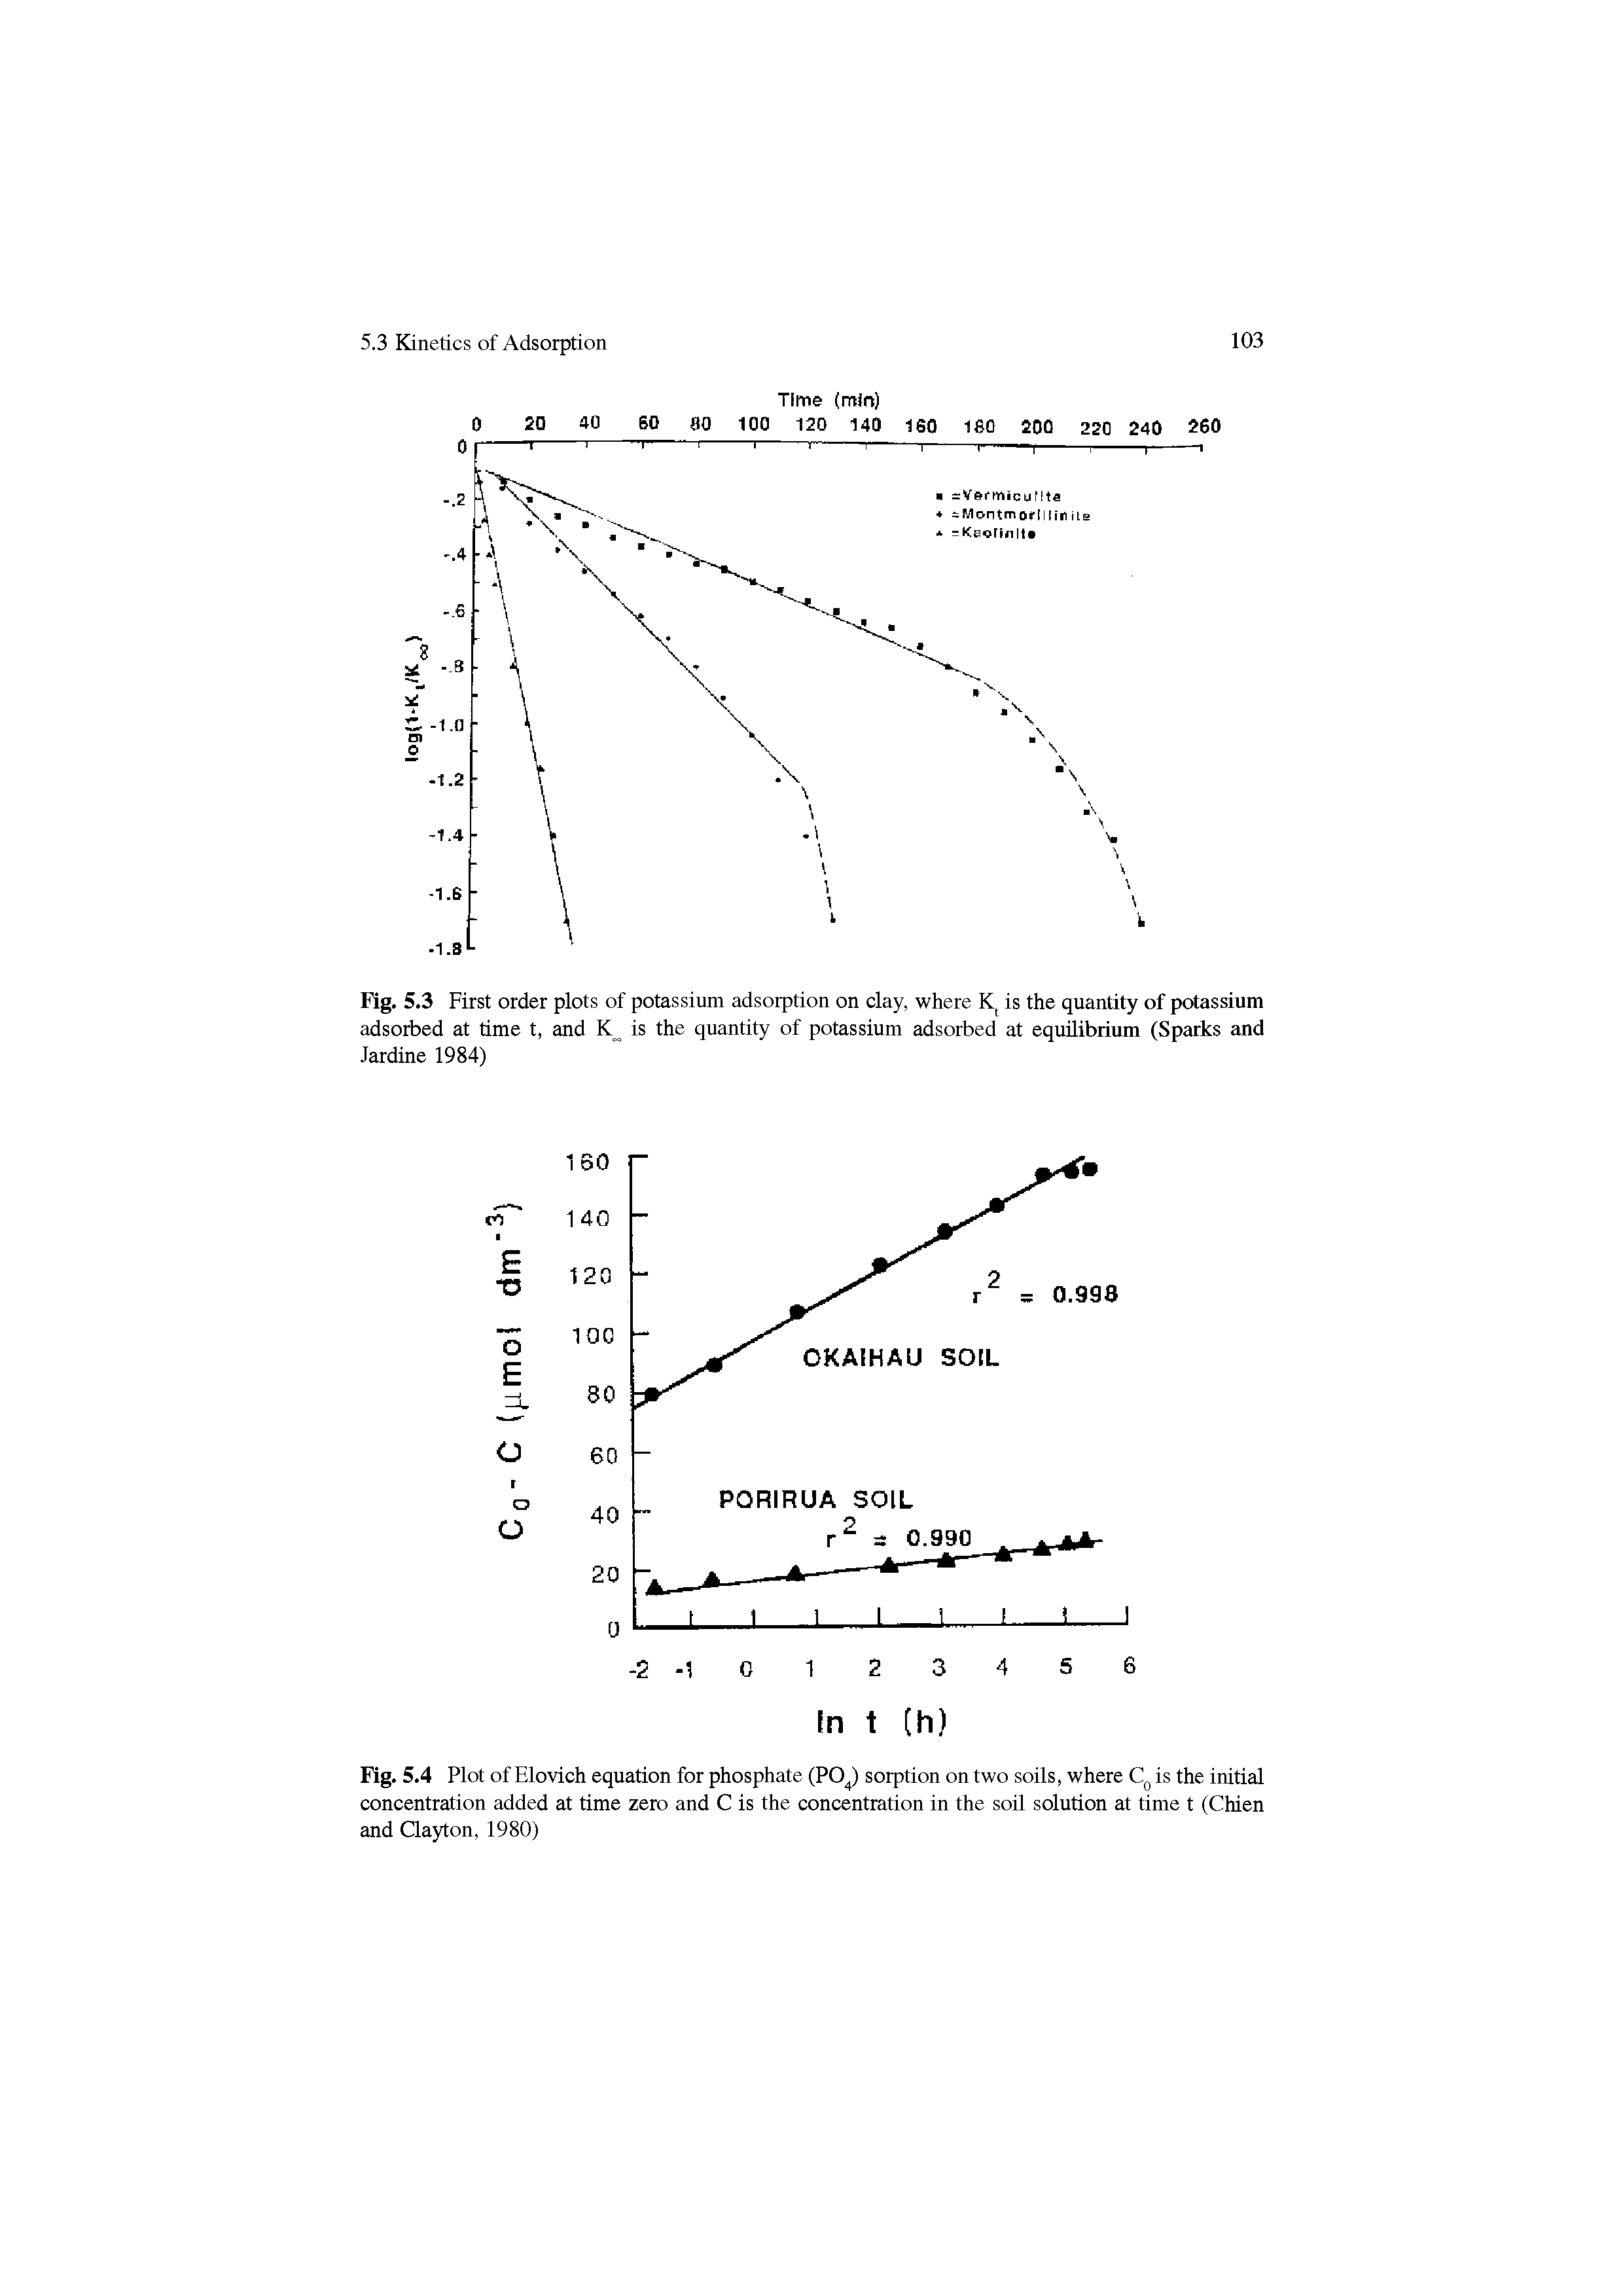 Fig. 5.3 First order plots of potassium adsorption on clay, where is the quantity of potassium adsorbed at time t, and K is the quantity of potassium adsorbed at equilibrium (Sparks and Jardine 1984)...